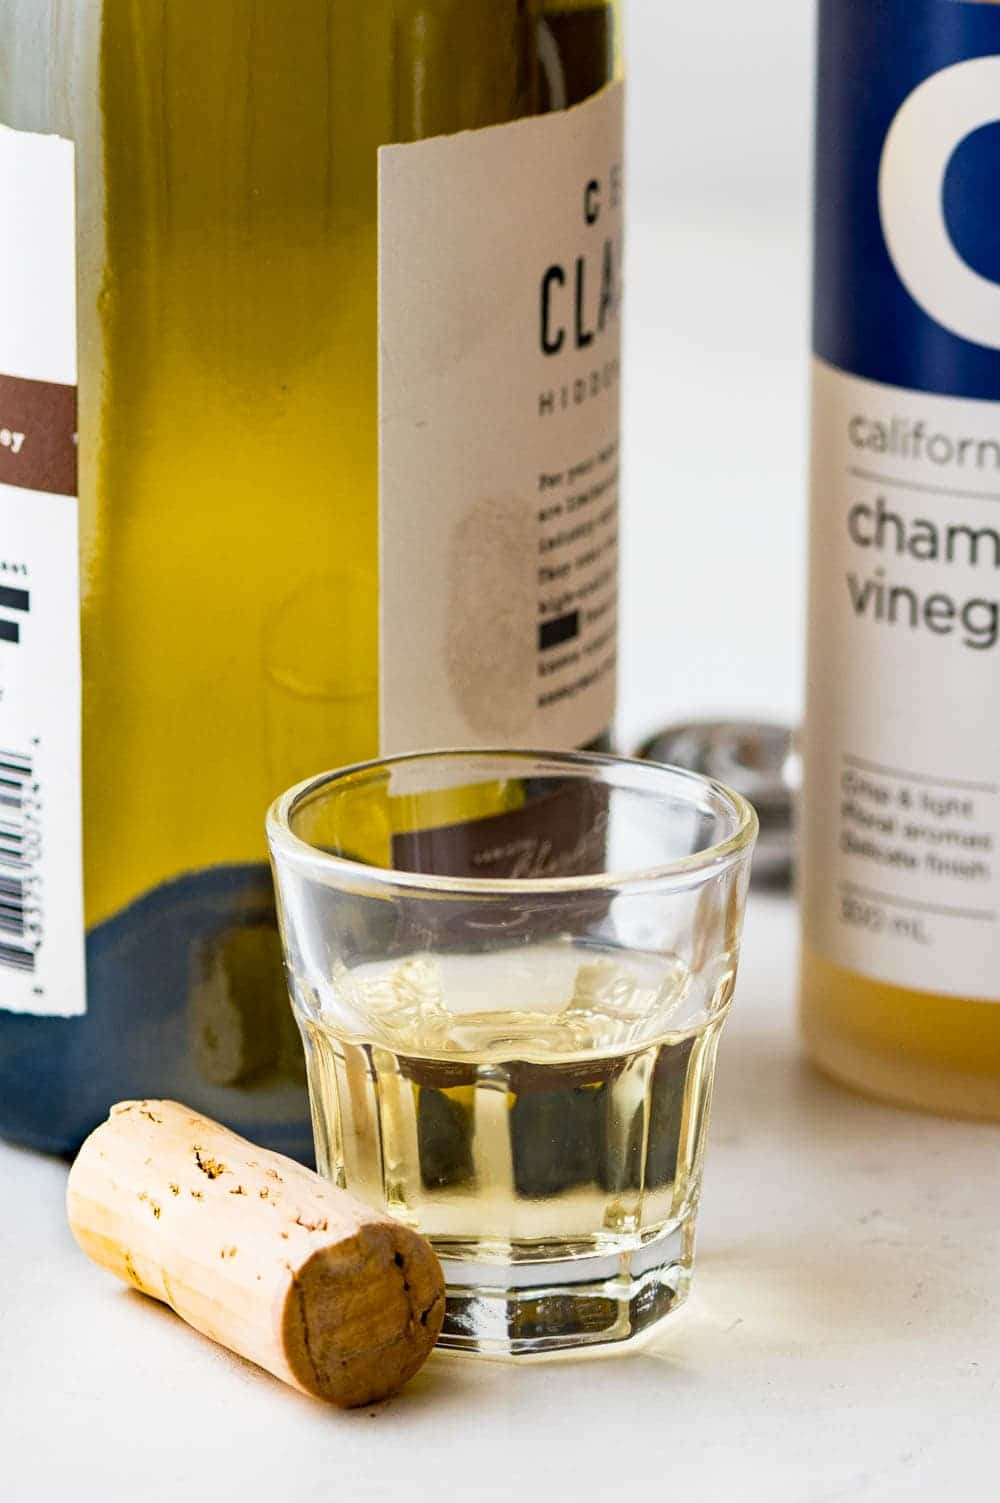 white wine in a small glass with a cork.